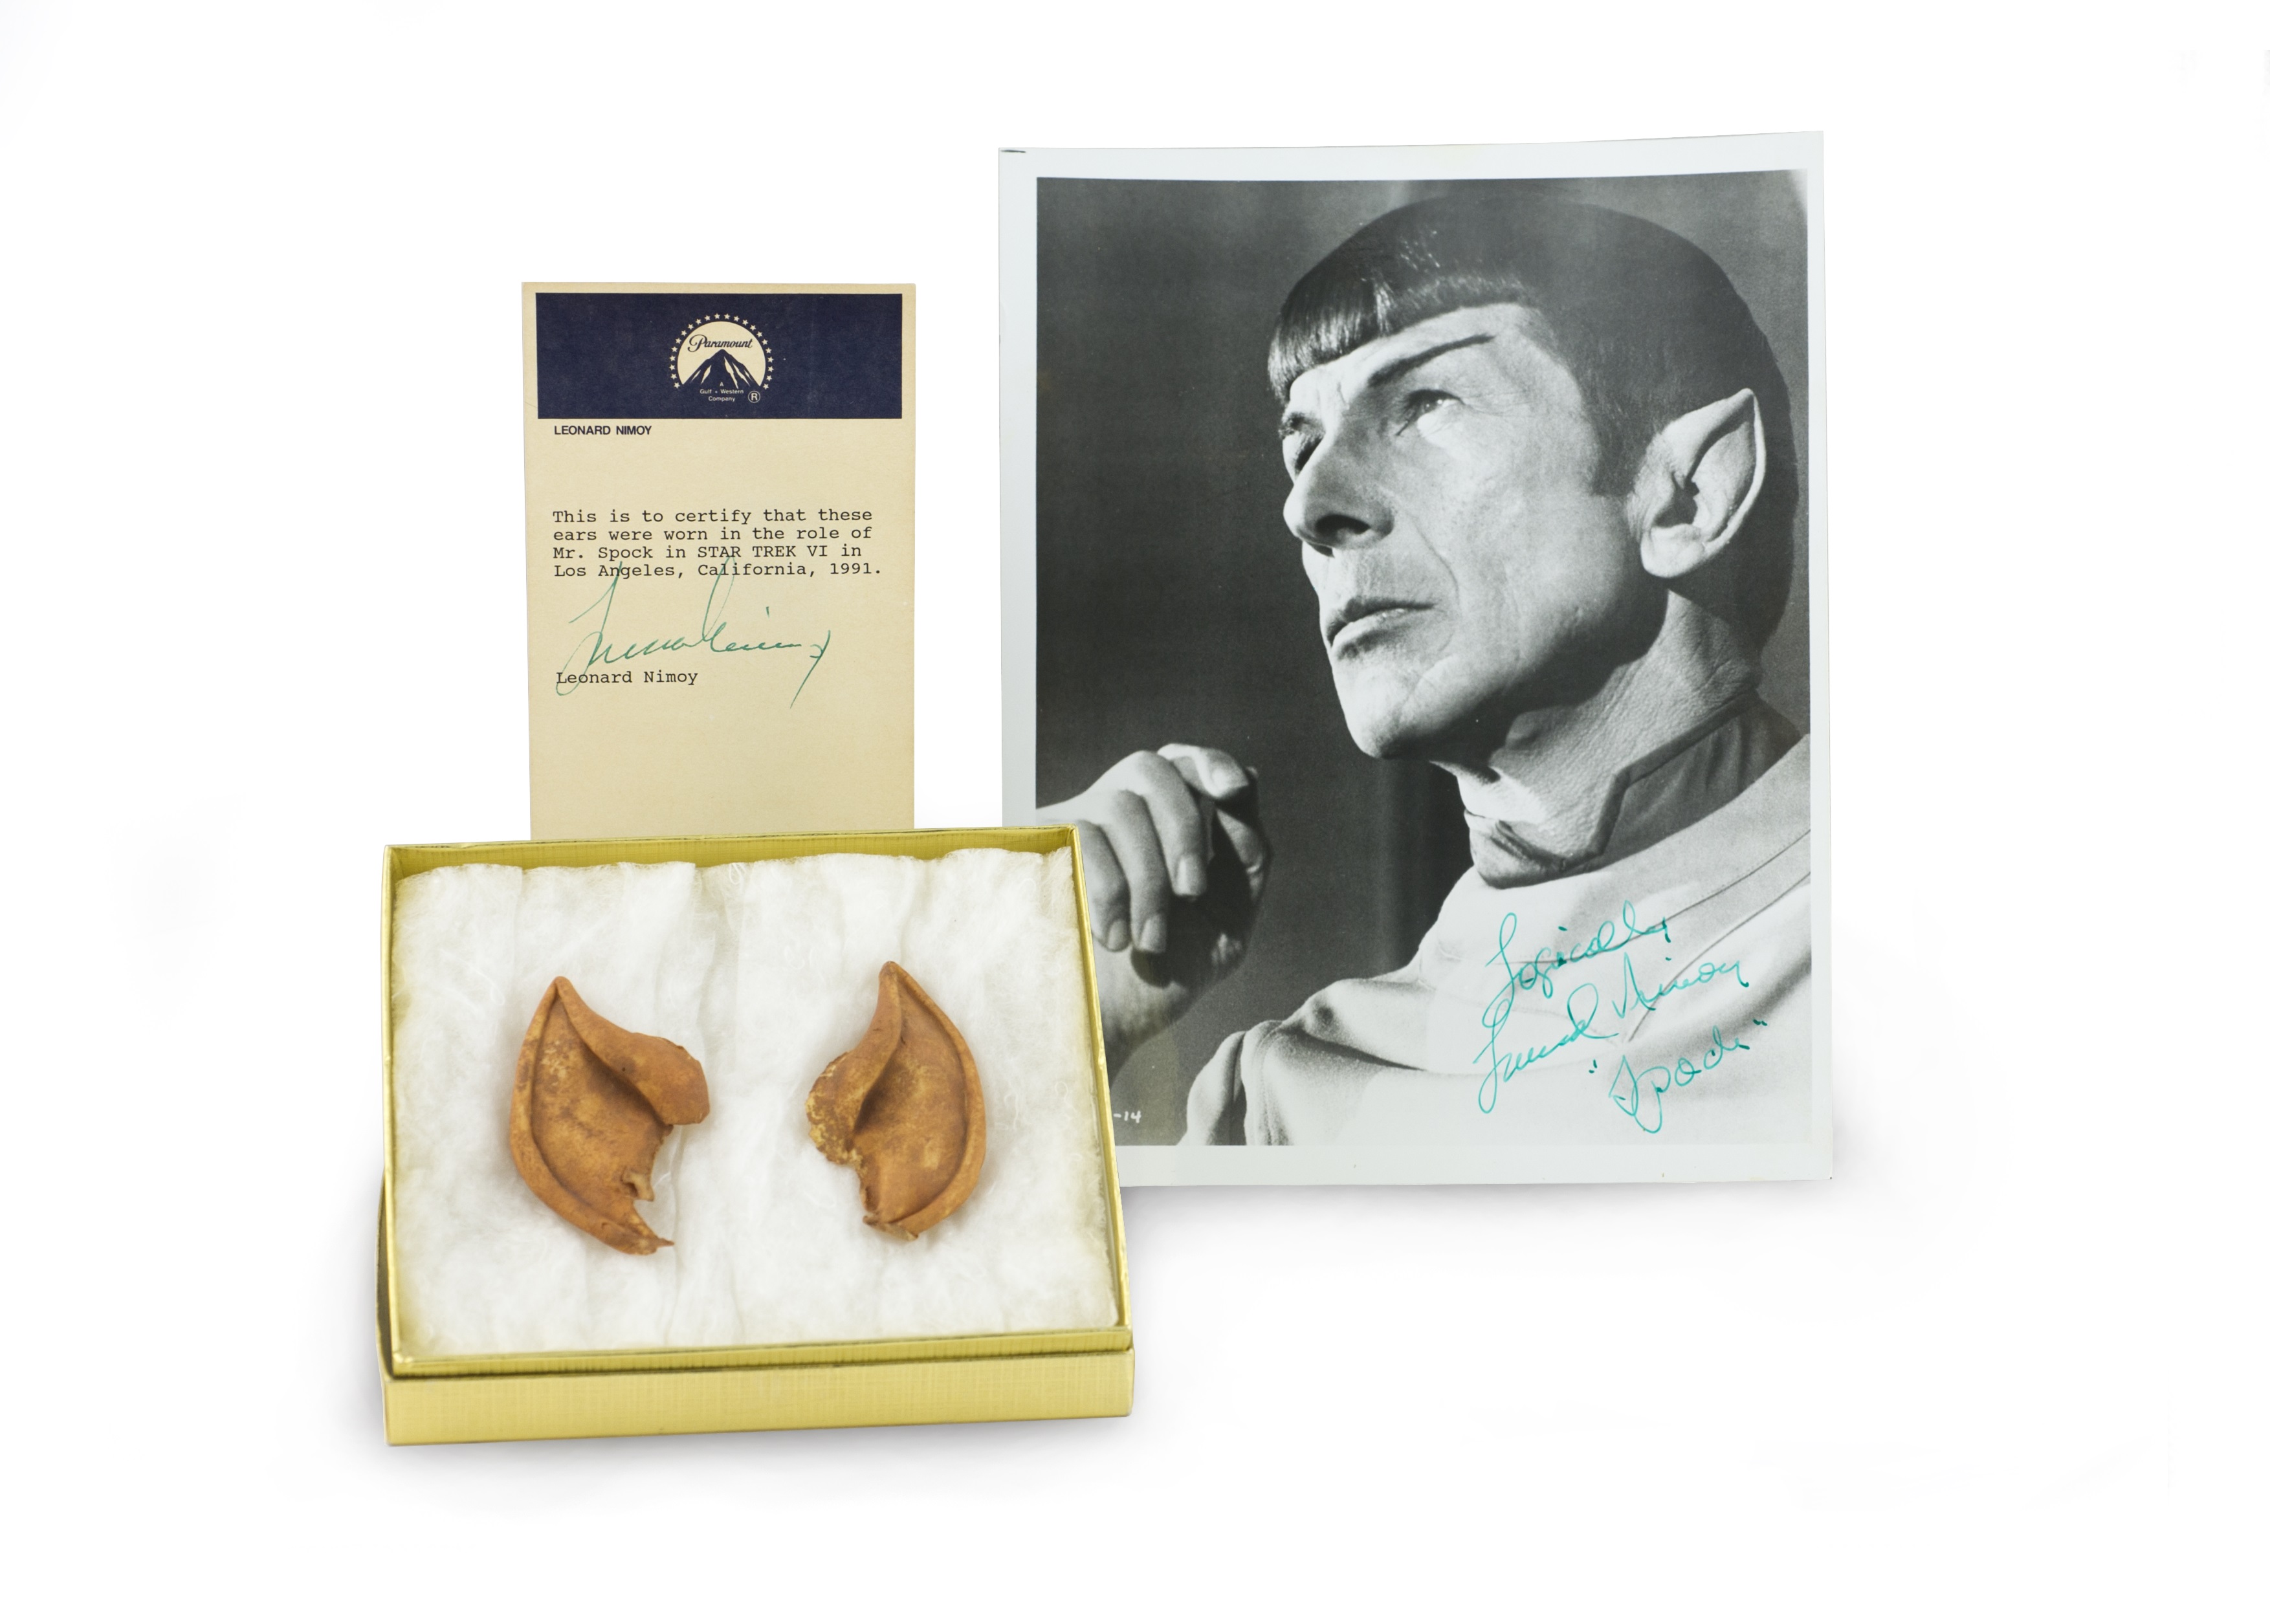 Ben Motz's donation of a pair of Spock's ears, worn by Leonard Nimoy in Star Trek VI, with signed photo.